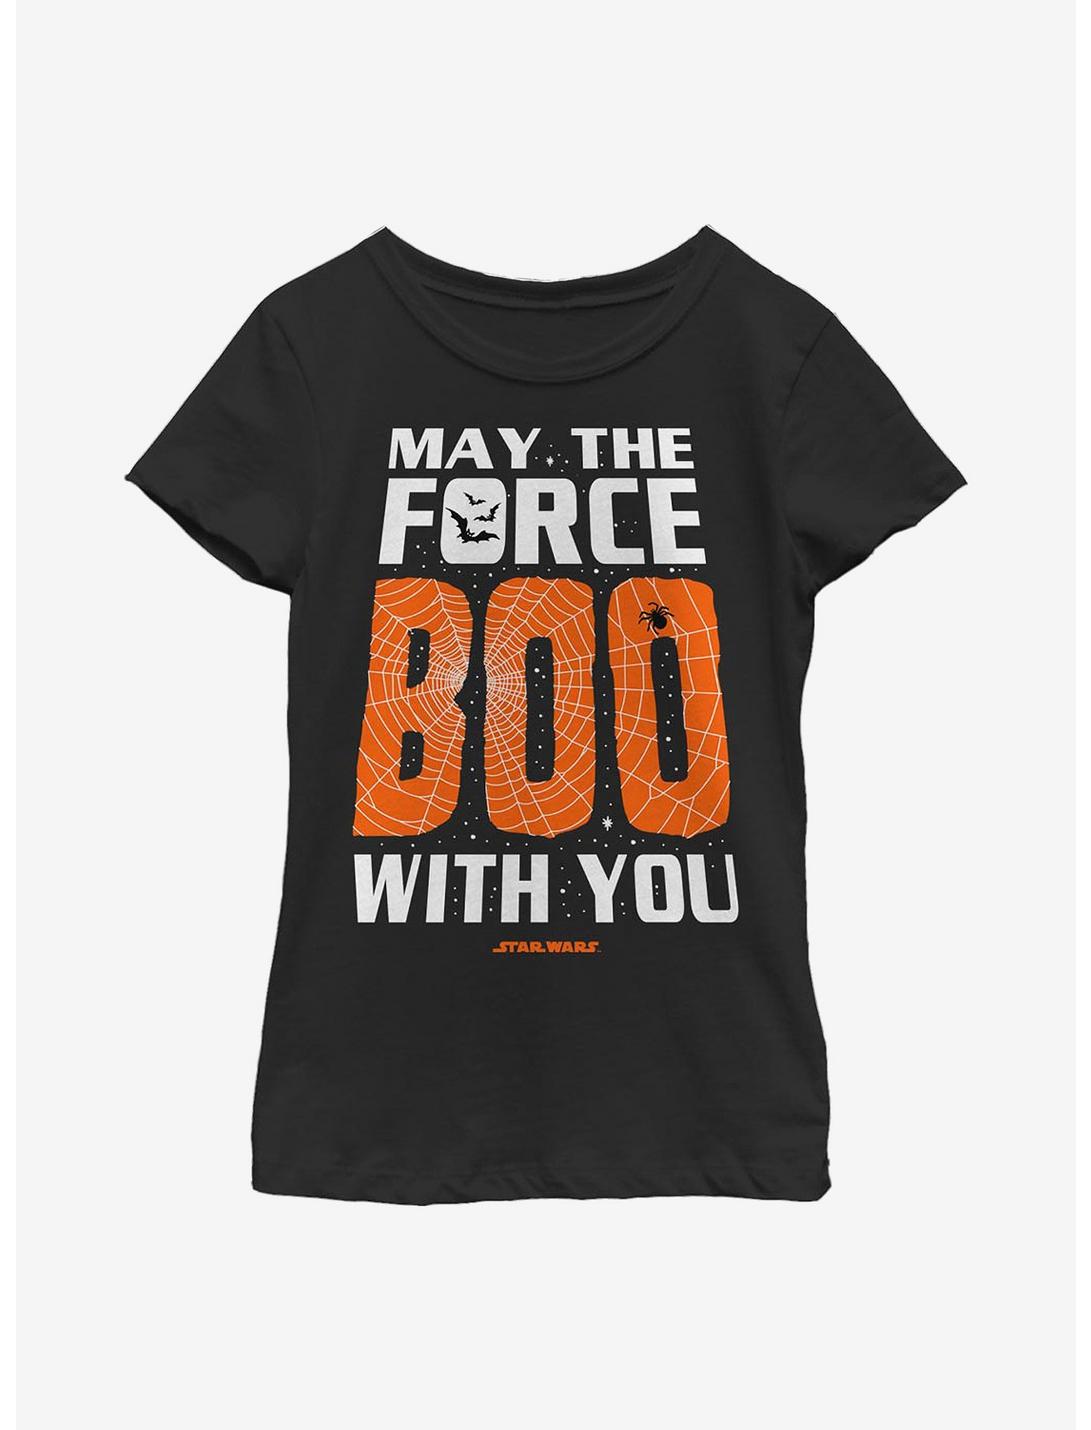 Star Wars Boo With You Youth Girls T-Shirt, BLACK, hi-res